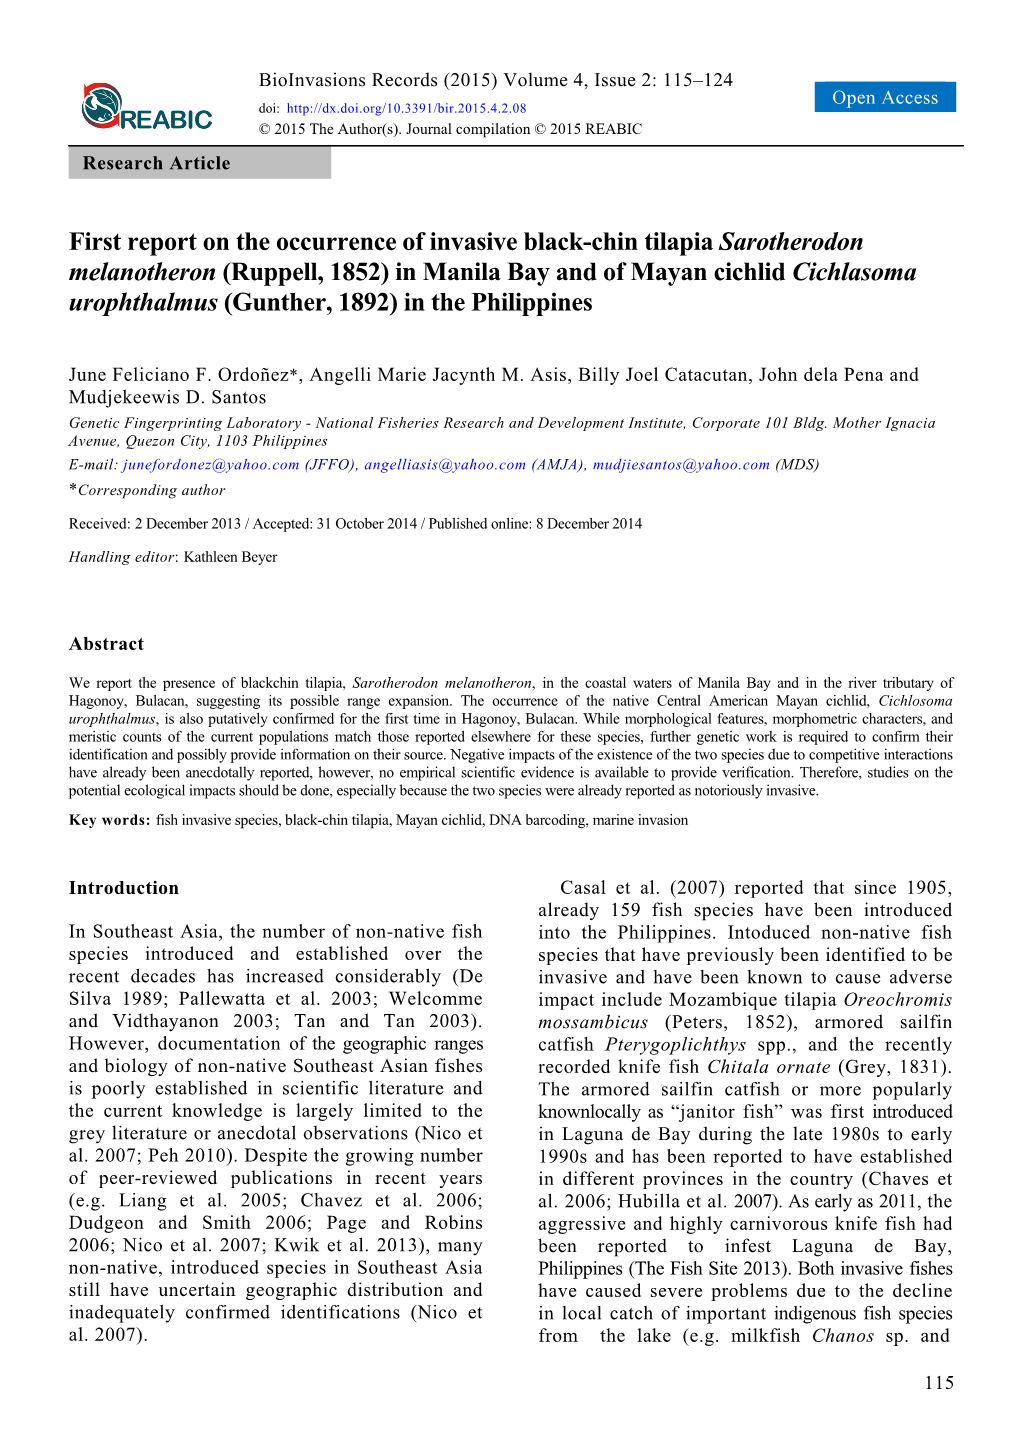 First Report on the Occurrence of Invasive Black-Chin Tilapia Sarotherodon Melanotheron